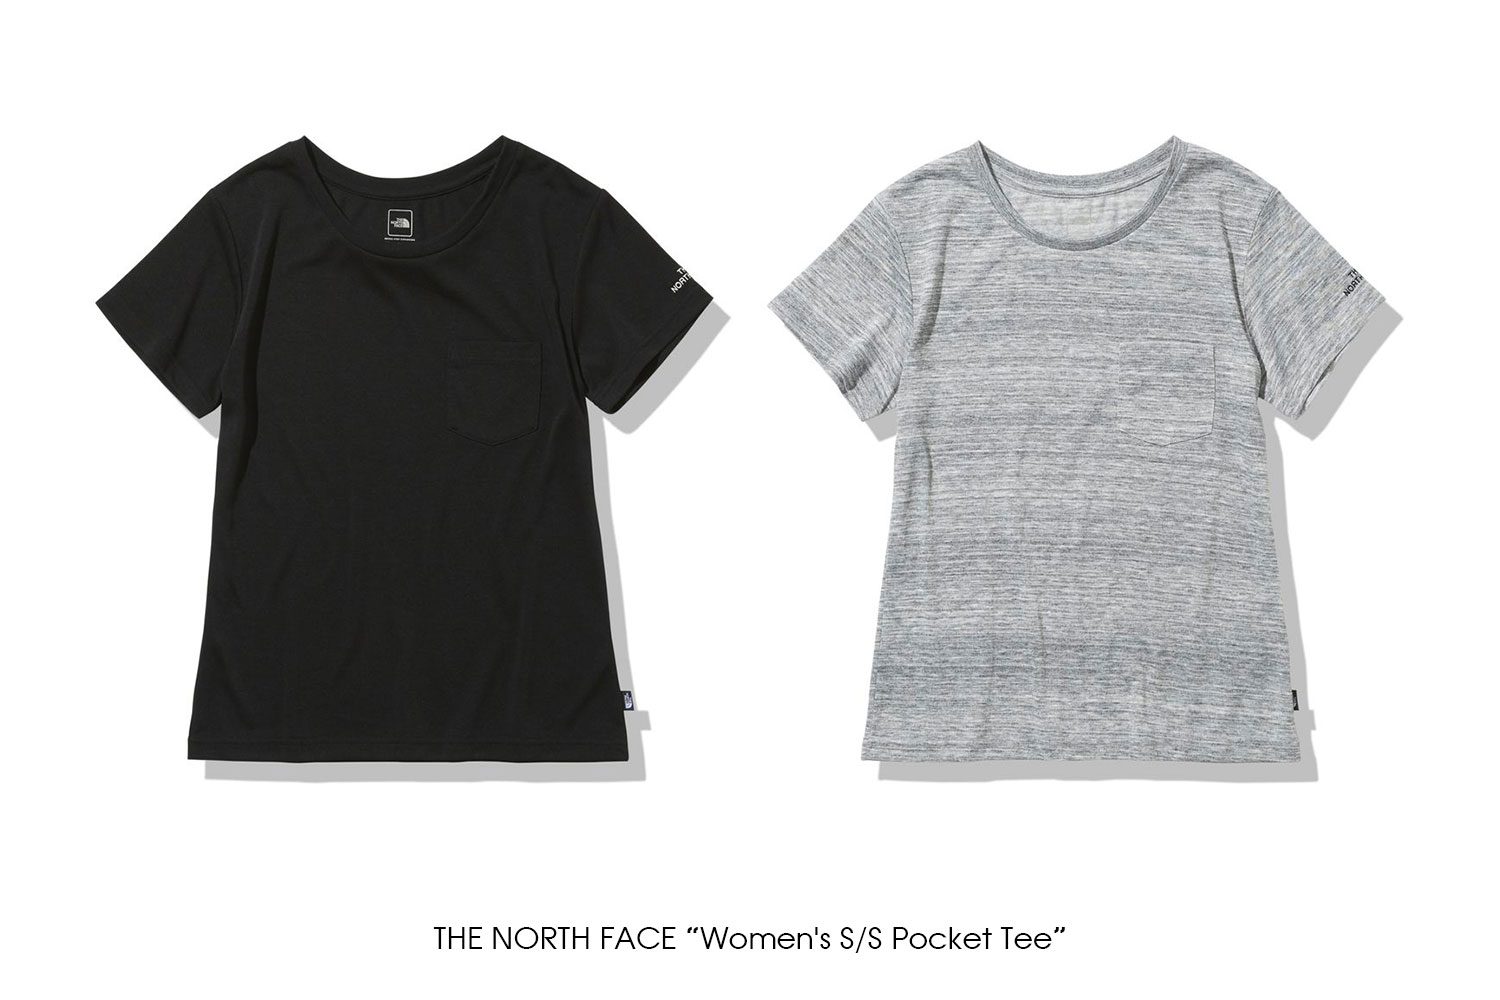 THE NORTH FACE "Women's S/S Pocket Tee"